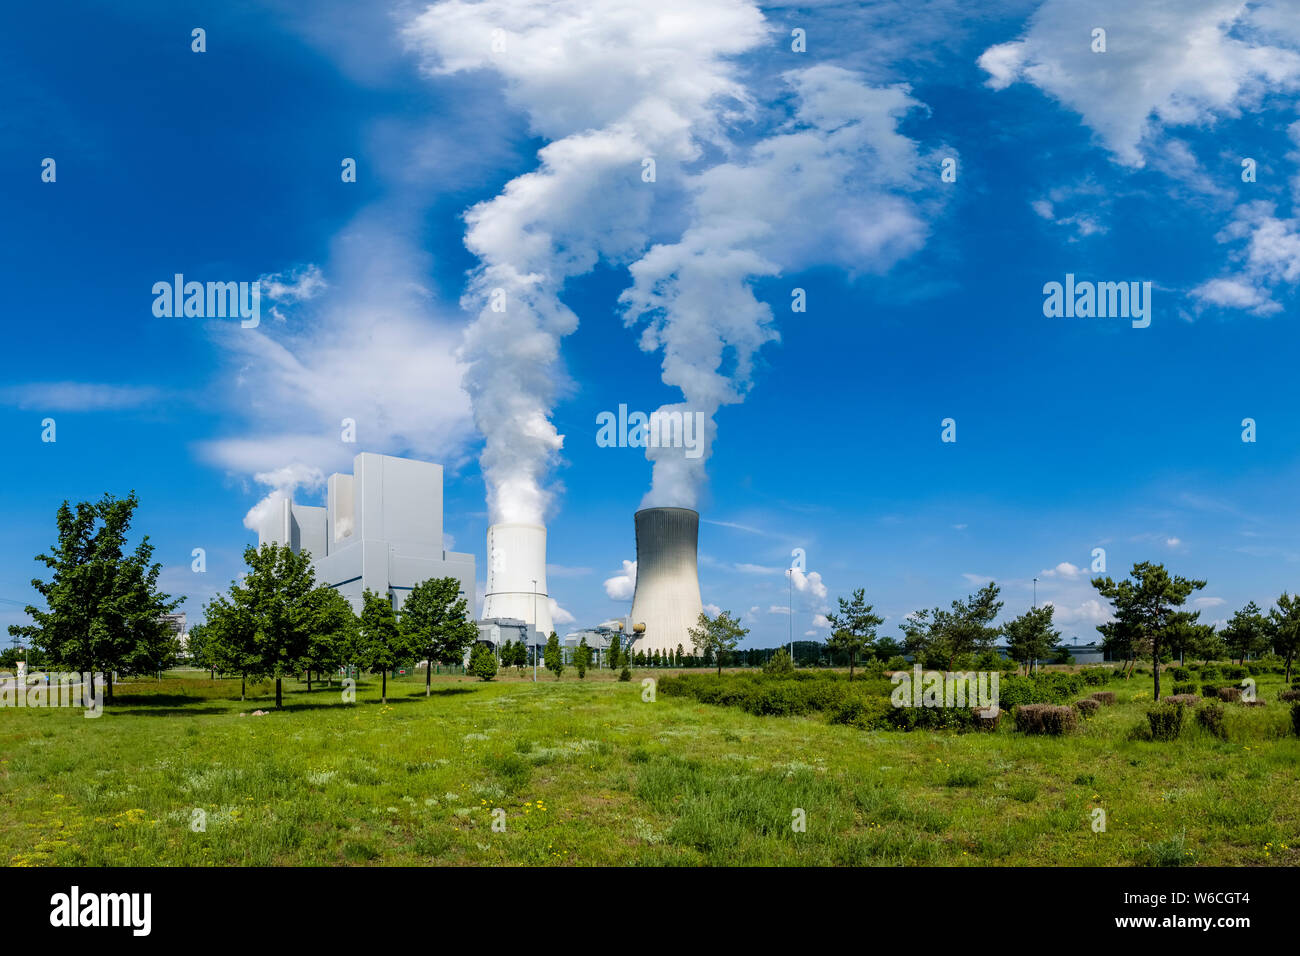 The buildings and steaming cooling towers of a coal-fired power plant in agricultural landscape Stock Photo